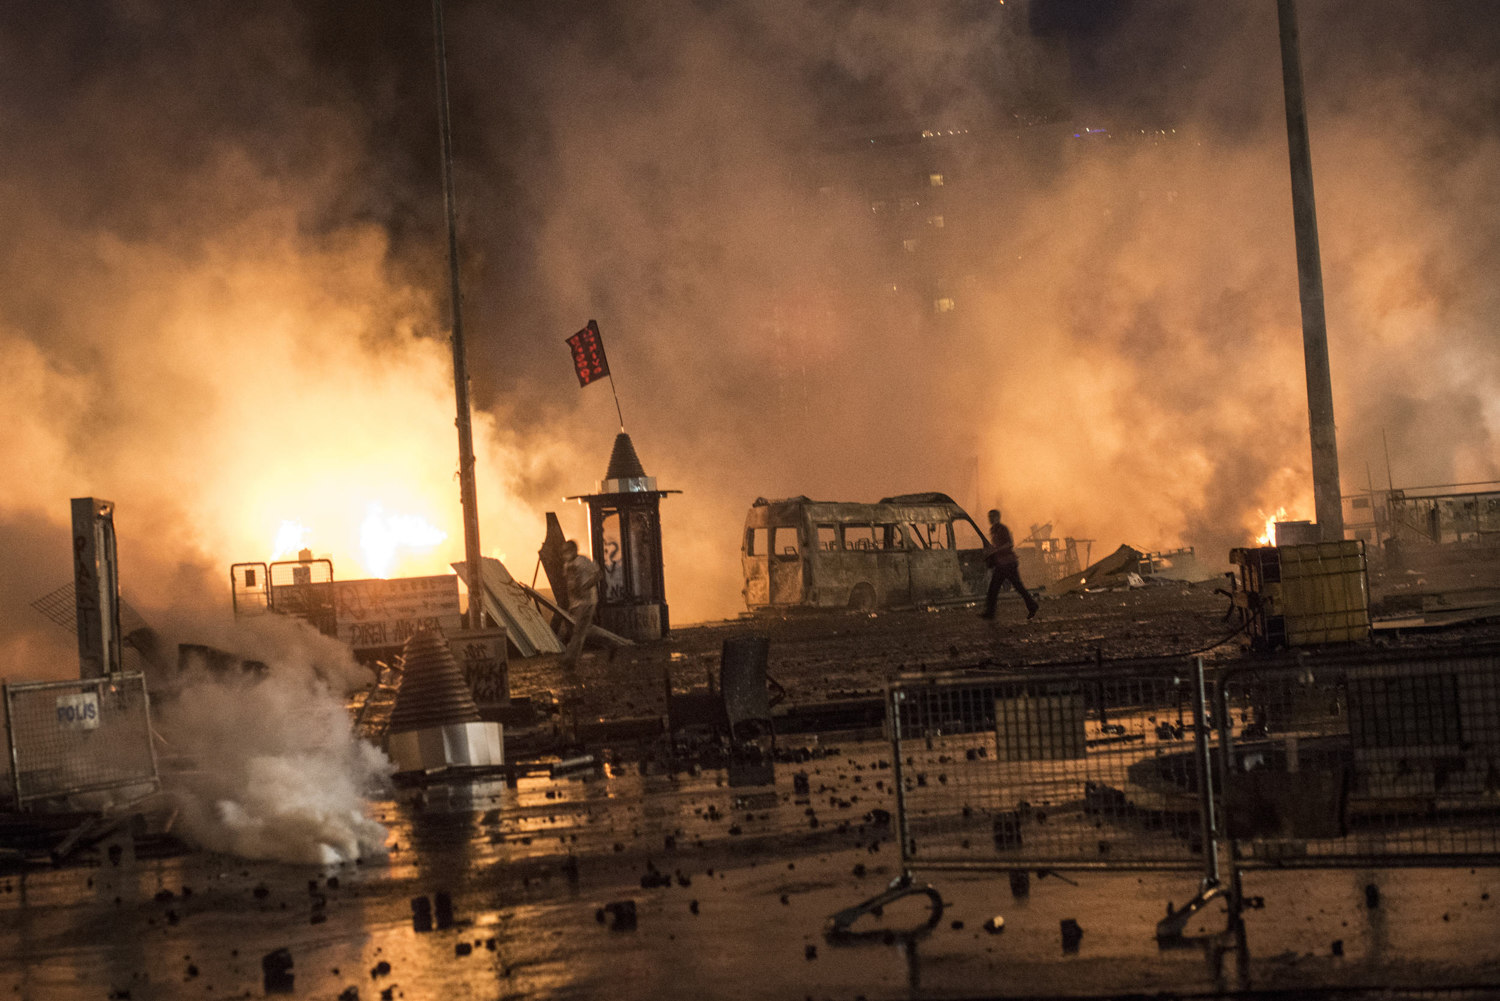  As the police attempt to clear Taksim square, violence breaks out on June 11th, 2013. After hours of tear gassing and TOMA tanks (armored vehicles that spray a mix of water and tear gas) the protestors managed to momentarily re-take the square till 